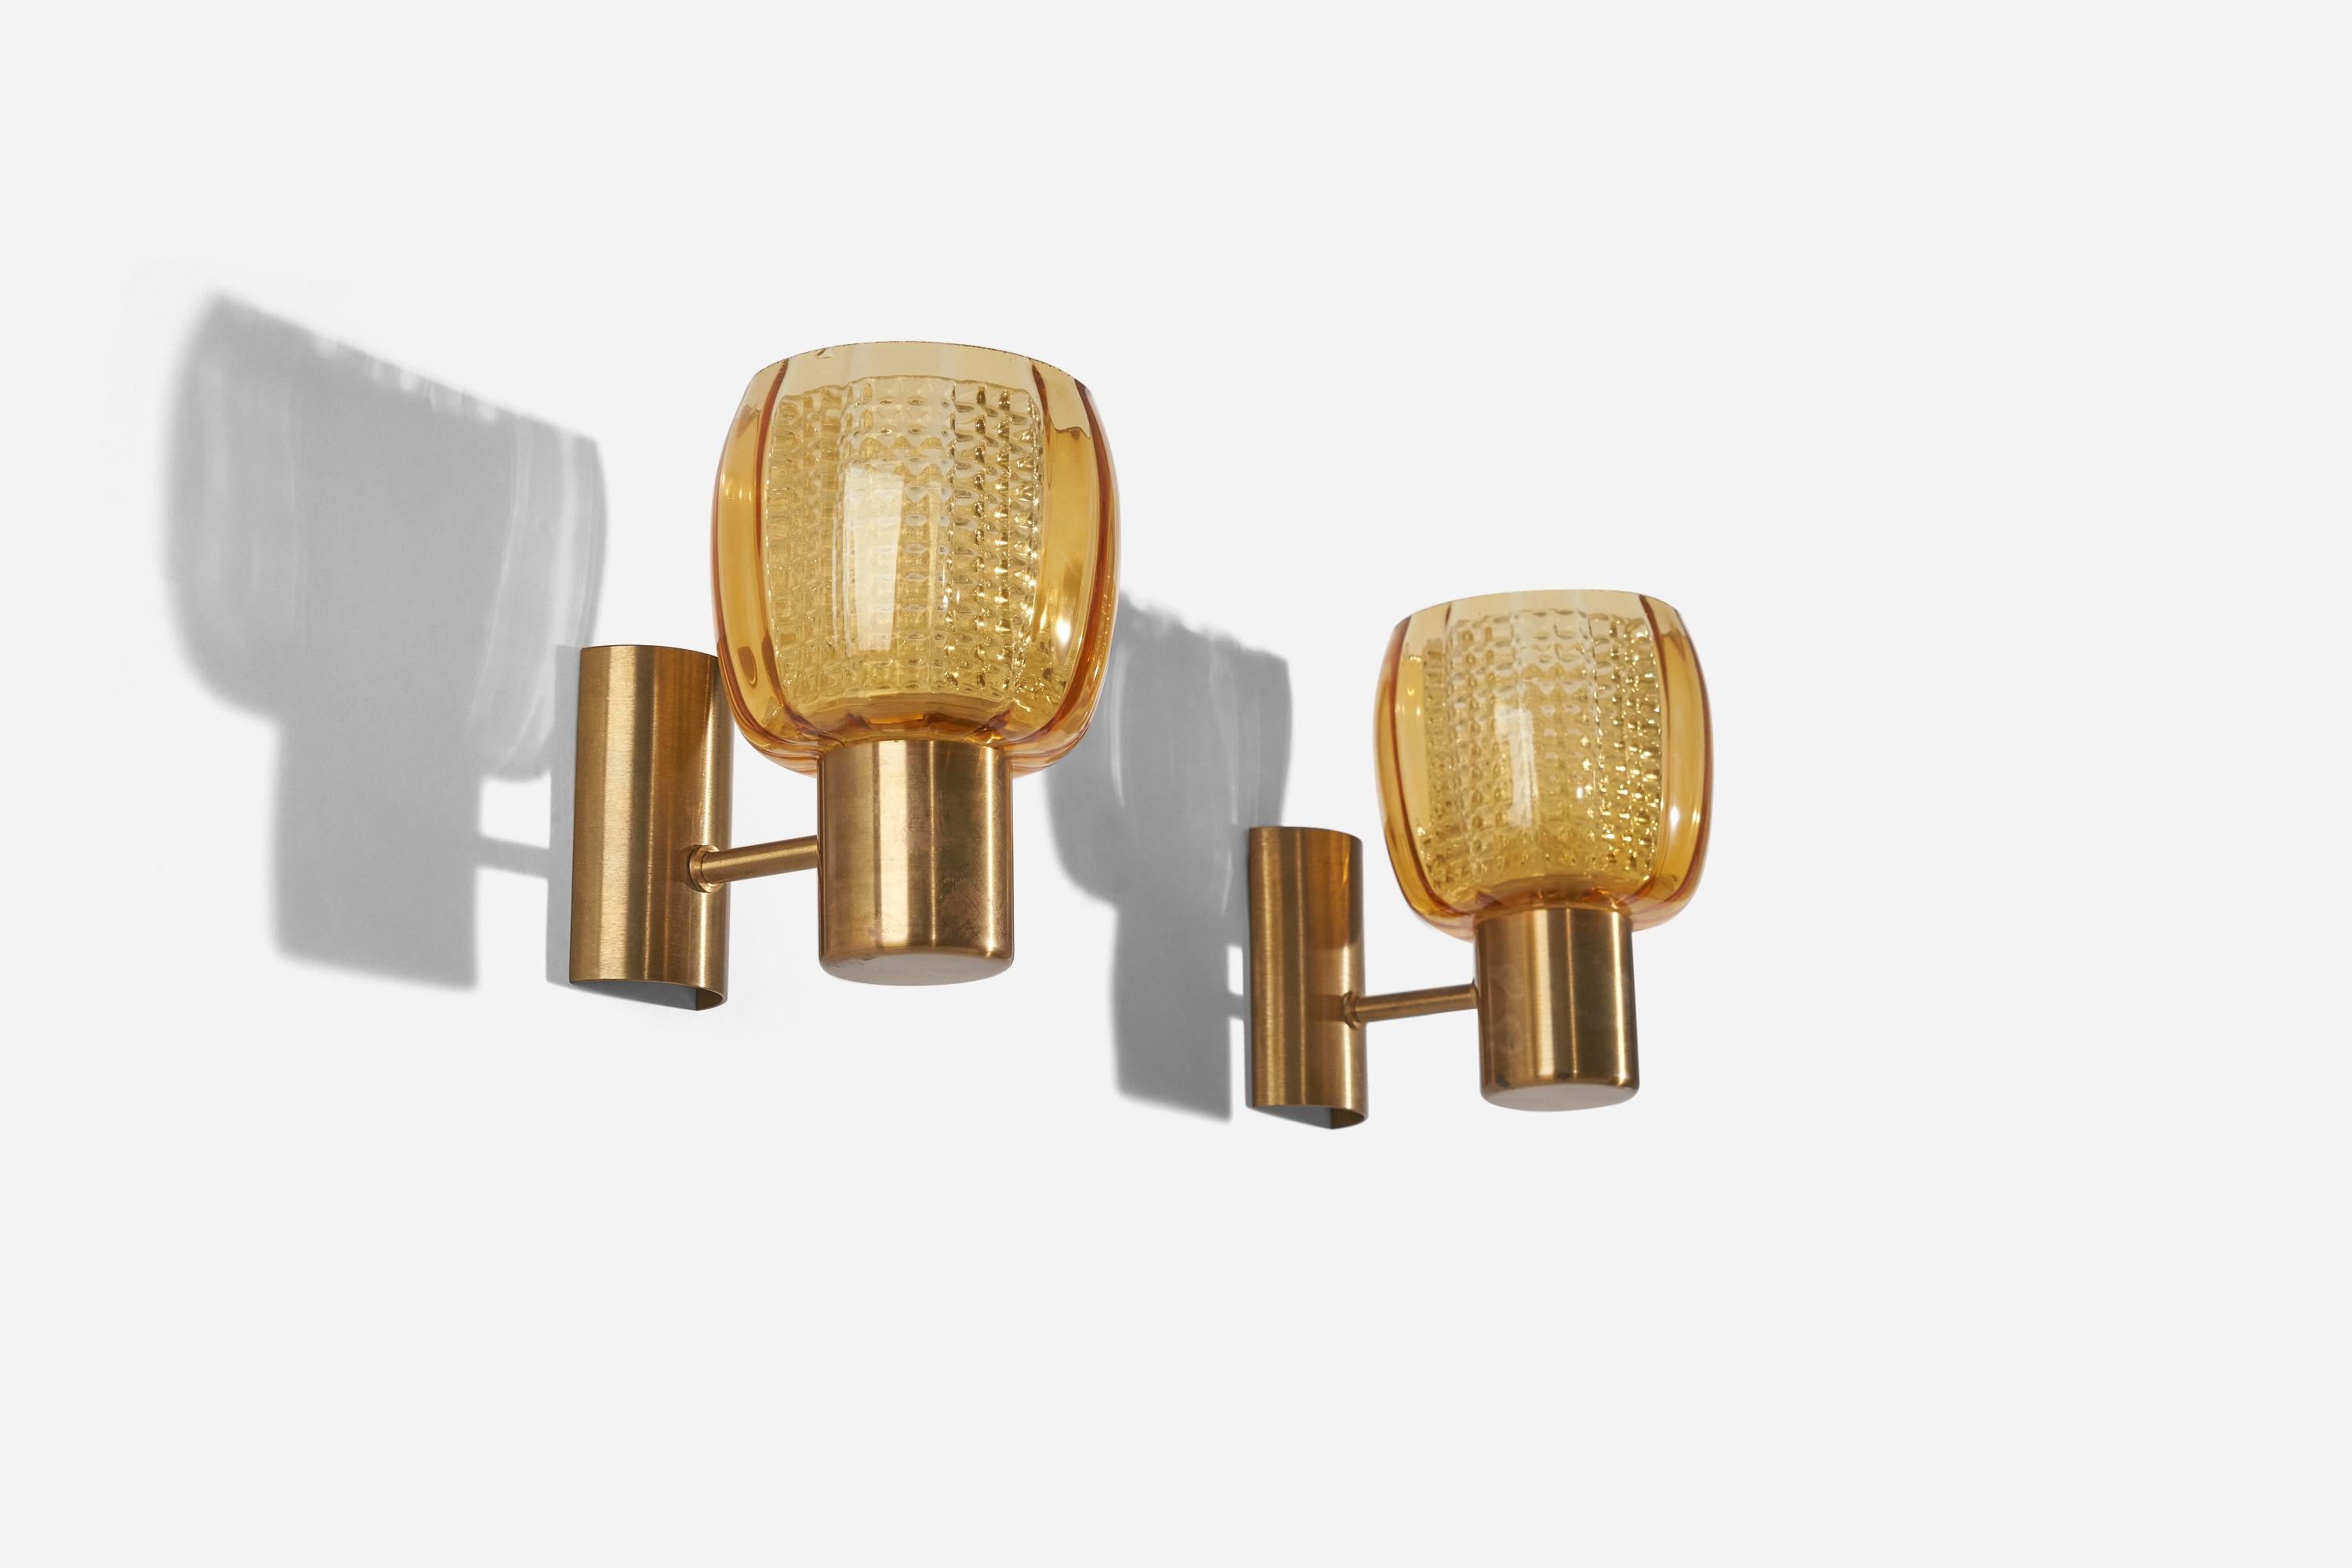 A pair of glass and brass sconces designed and produced in Sweden, c. 1960s.

Dimensions of back plate (inches) : 3.875 x 2.125 x 1 (H x W x D).